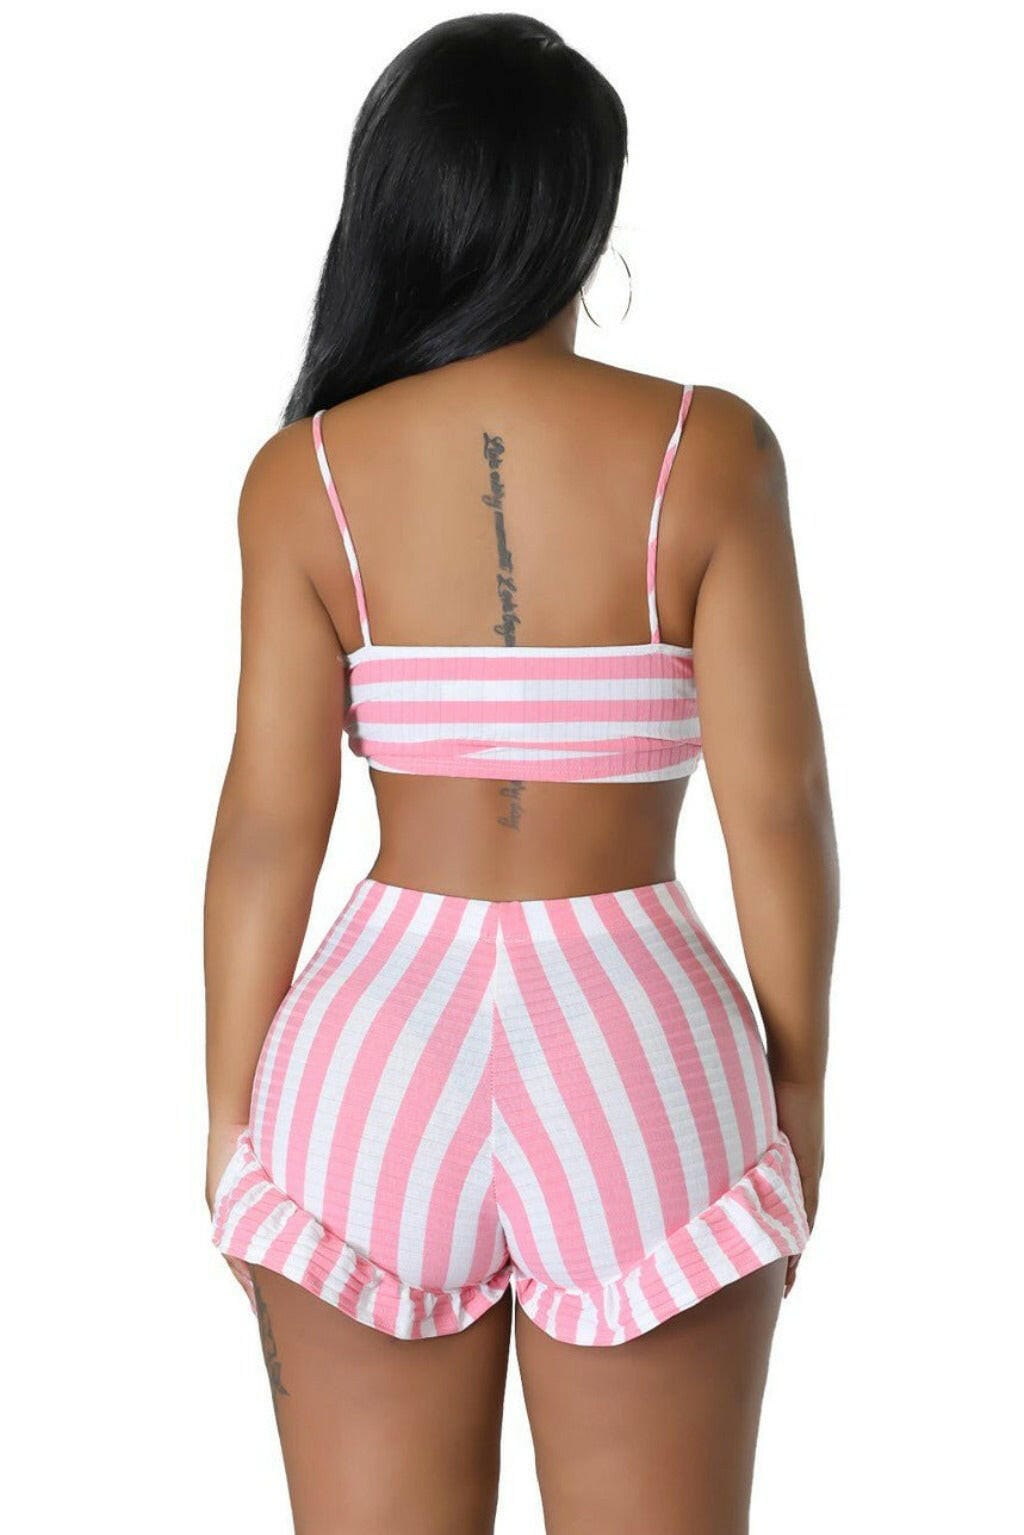 Epicplacess Shorts Better Believe It Shorts Outfift Set - Pink